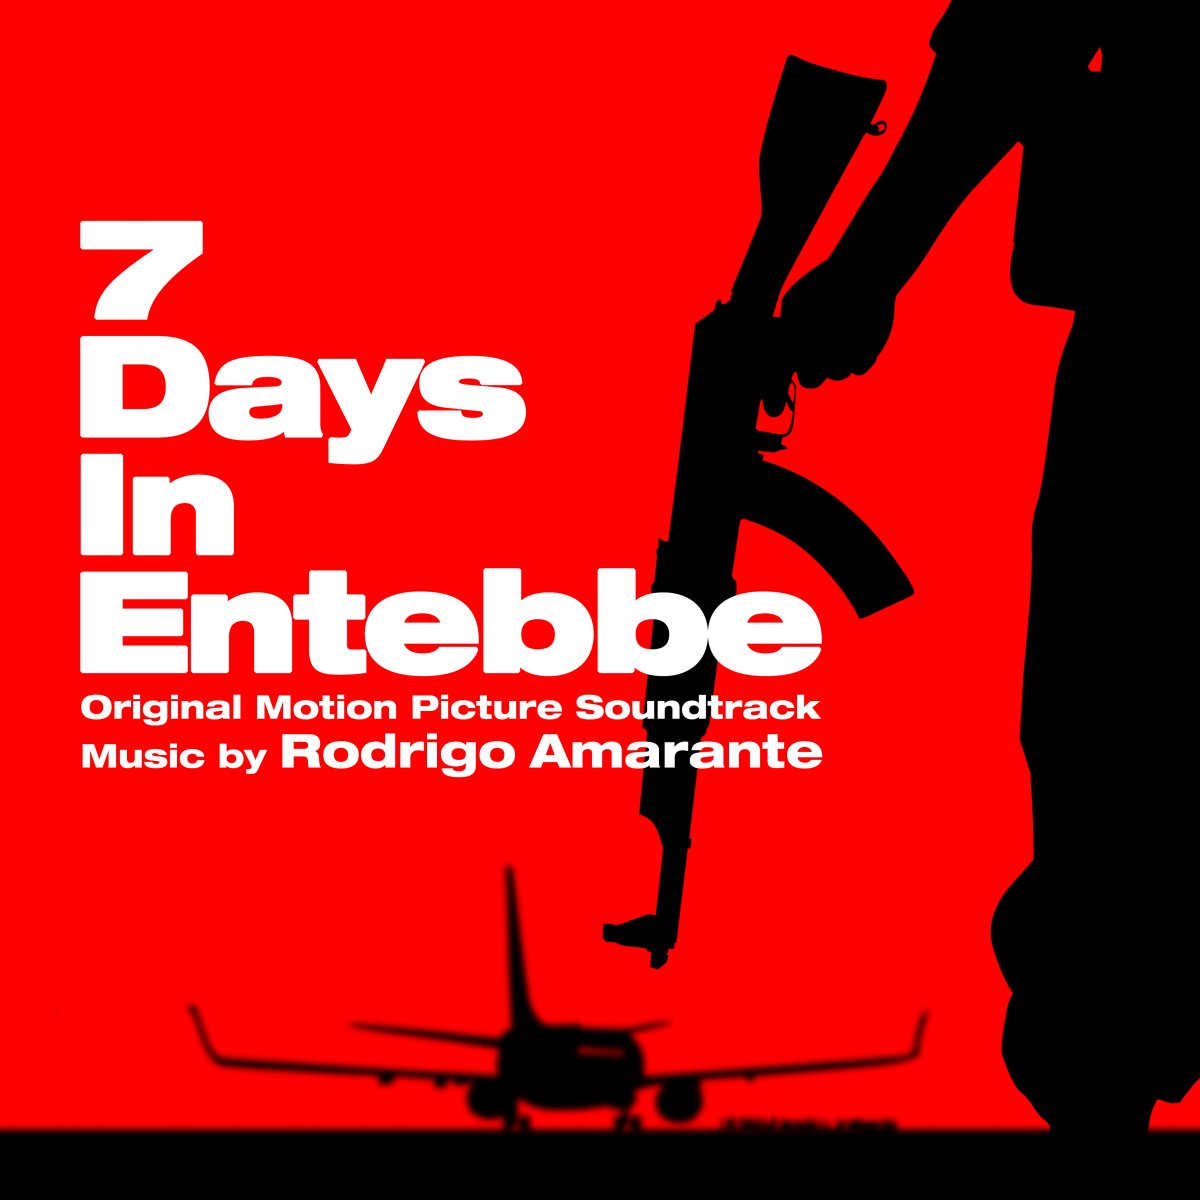 Otages  Entebbe (7 Days in Entebbe)